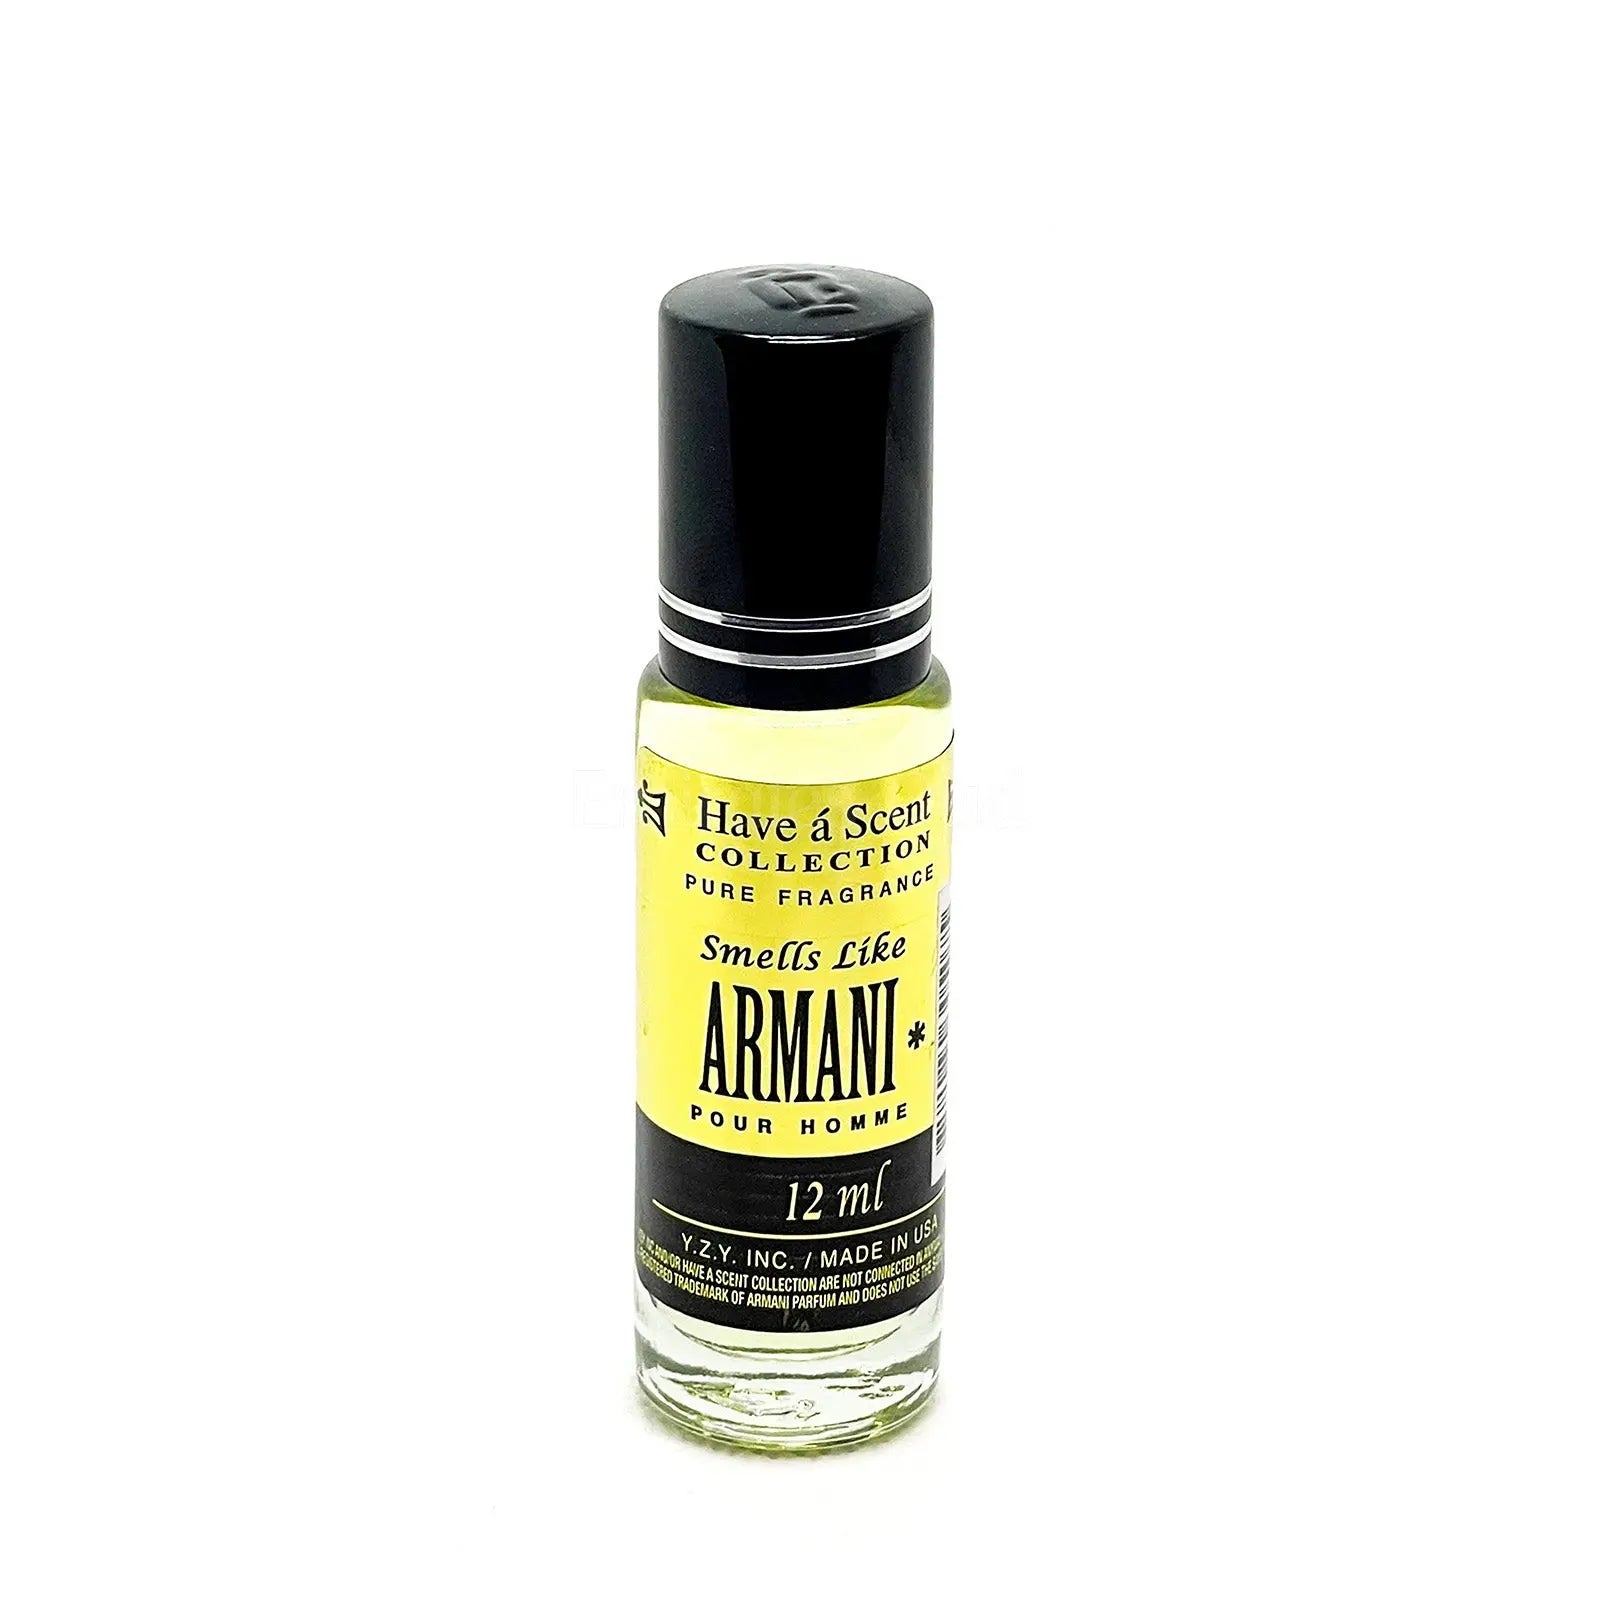 A Homme Perfume Oil 12ml Have A Scent Collection